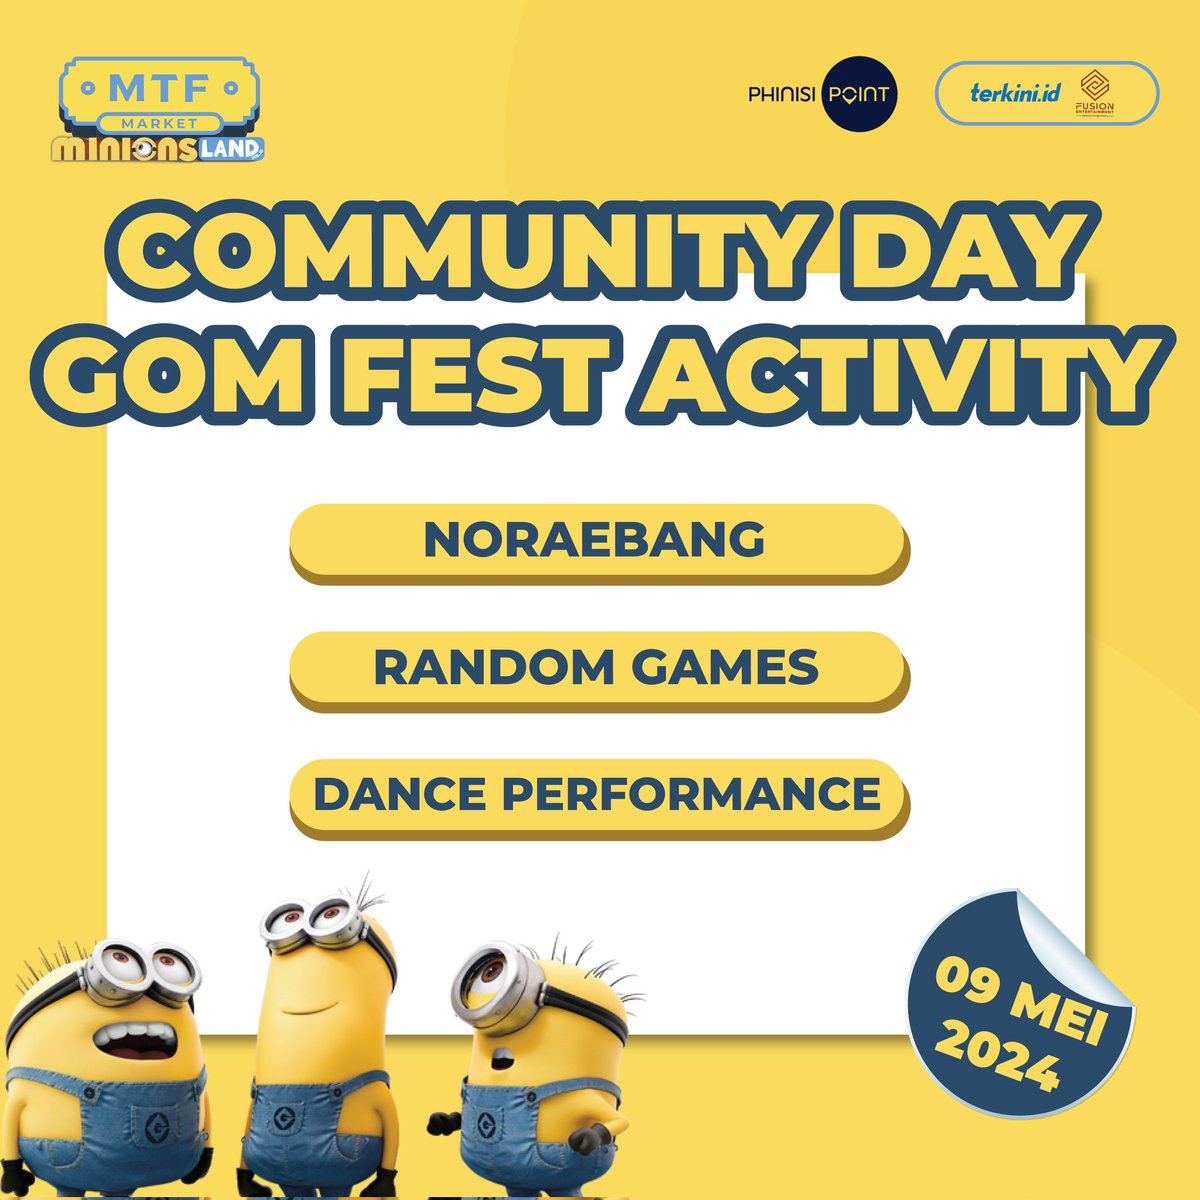 Hello Carats~~

We are proudly present : 
🎤 God of Music Festival 🎶

Let's sing along together with us 
Date : Thursday, May 9th 2024
Loc : MTF Market Phinisi Point Makassar
🎉FREE ENTRY PAPOY🎉

Also there will be a special performance by SEBONG TEAM ✨

See u soon Carats 🩷🩵